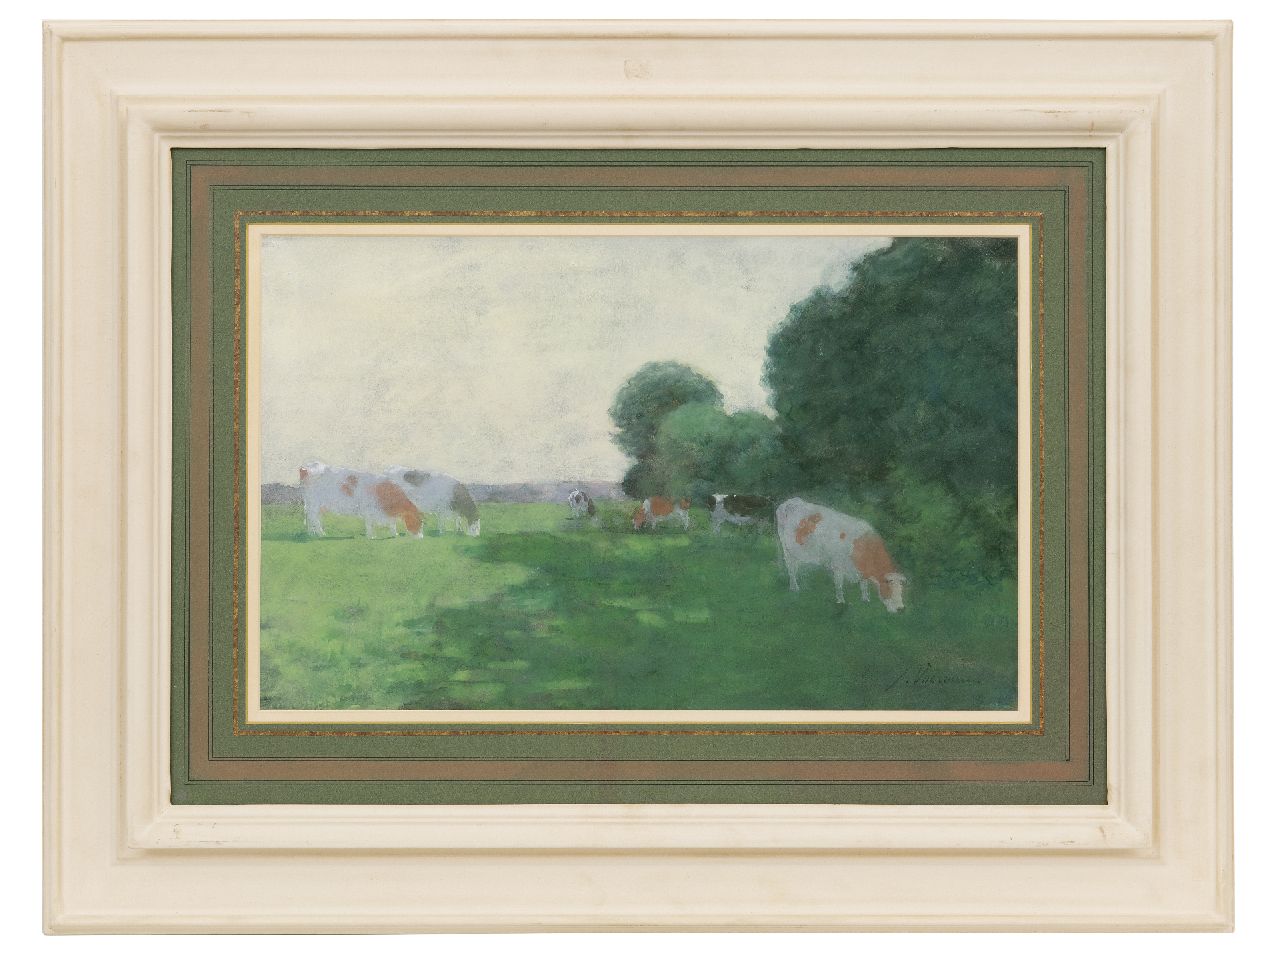 Voerman sr. J.  | Jan Voerman sr. | Watercolours and drawings offered for sale | Grazing cattle along the river IJssel, watercolour on paper 30.0 x 47.7 cm, signed l.r.